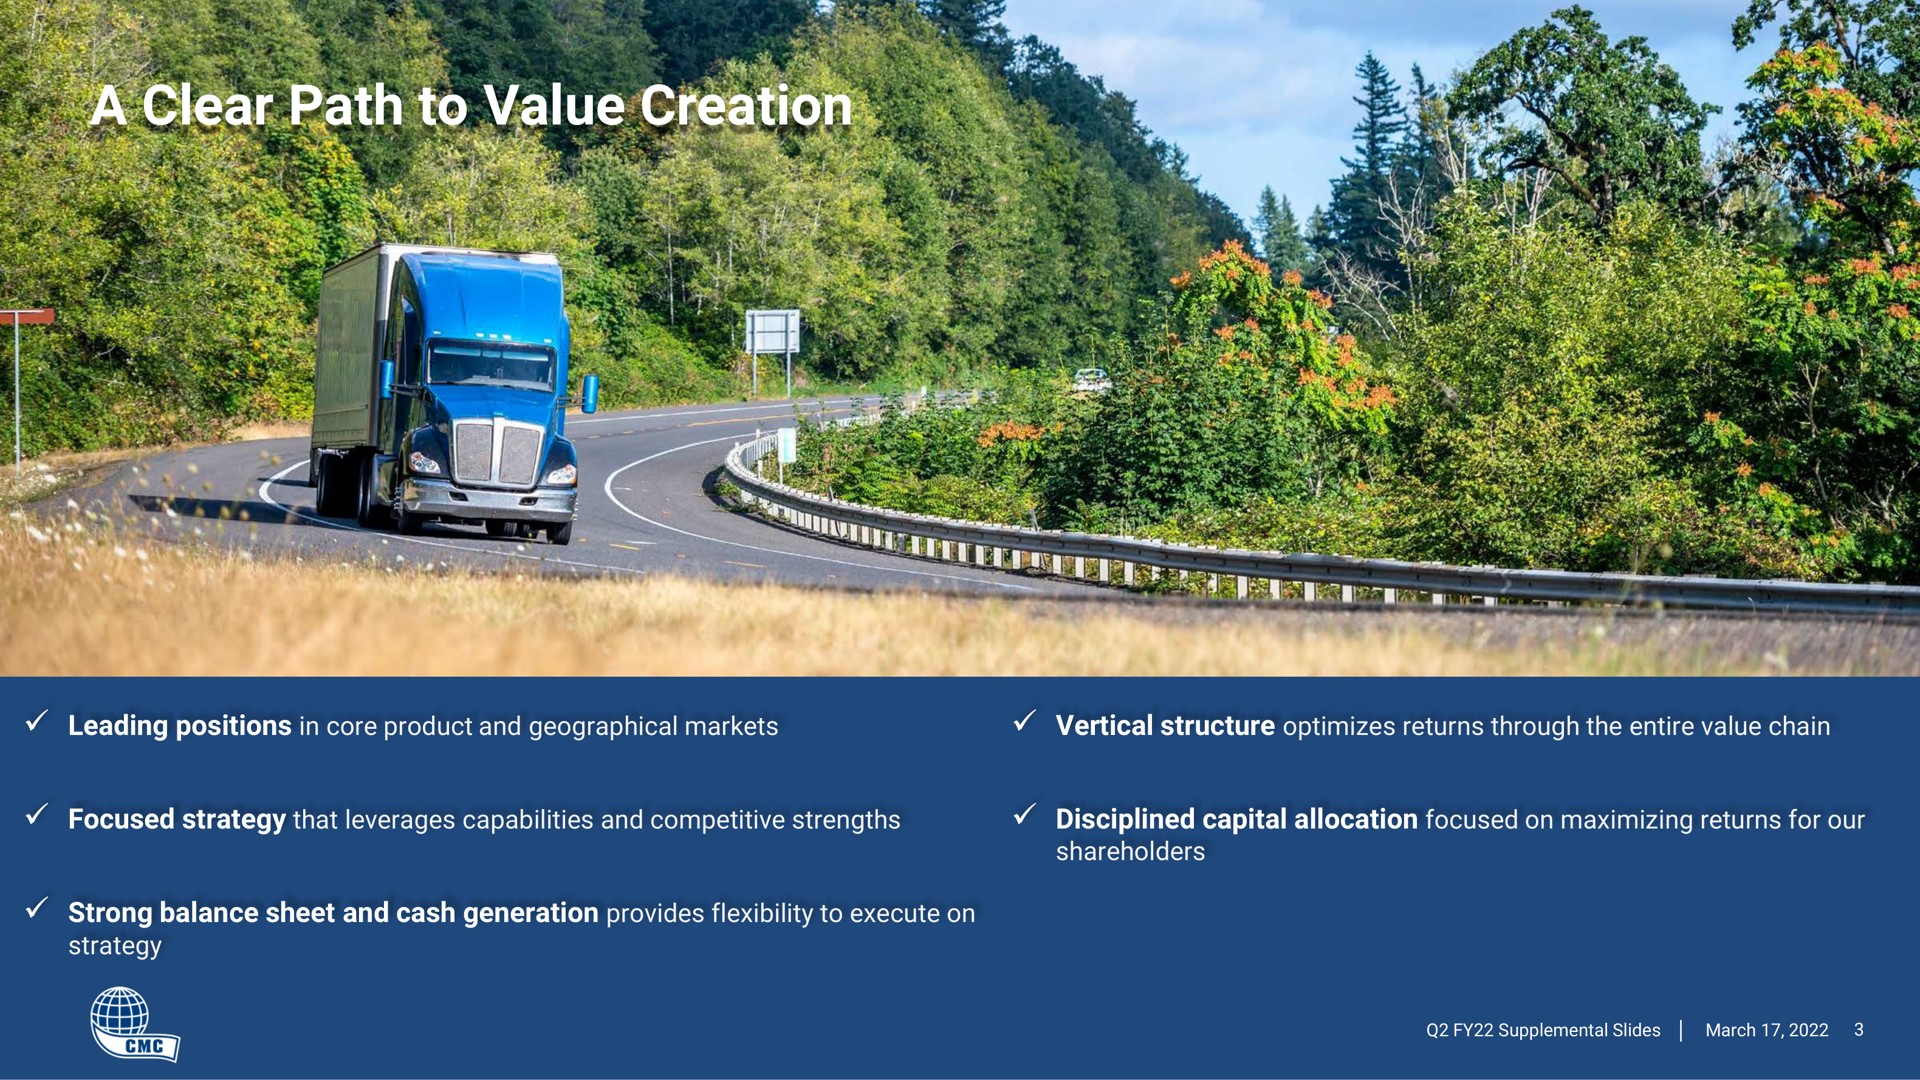 a clear path to value creation | Commercial Metals Company